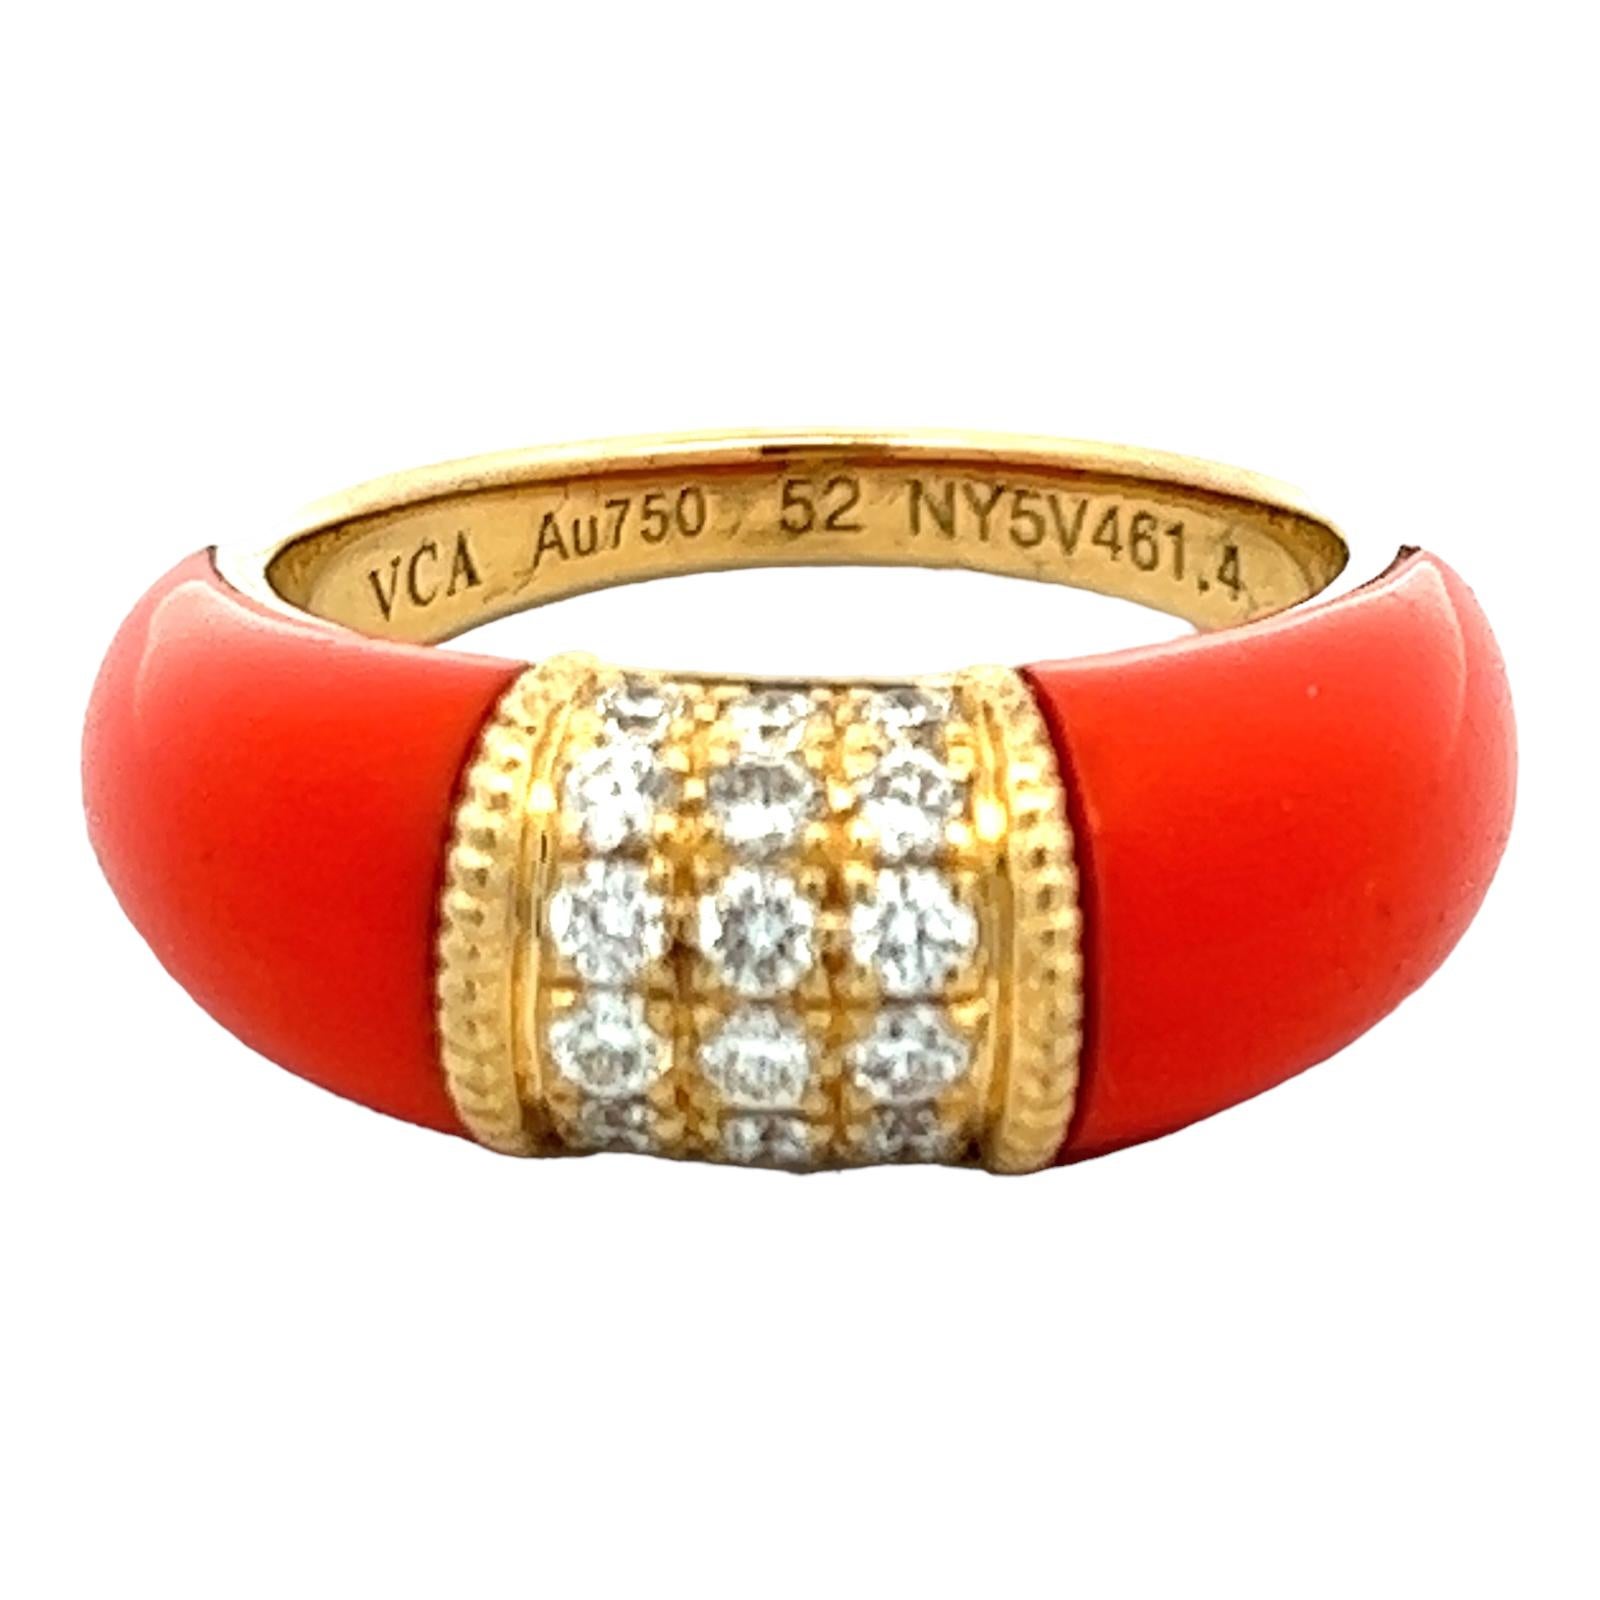 Van Cleef & Arpels 6 row diamond and coral inlay ring crafted in 18 karat yellow gold. The ring circa 1960's features two pieces of coral inlay with 18 round brilliant cut diamonds set in the center. The ring is size 52 (US size 6.5) and measures